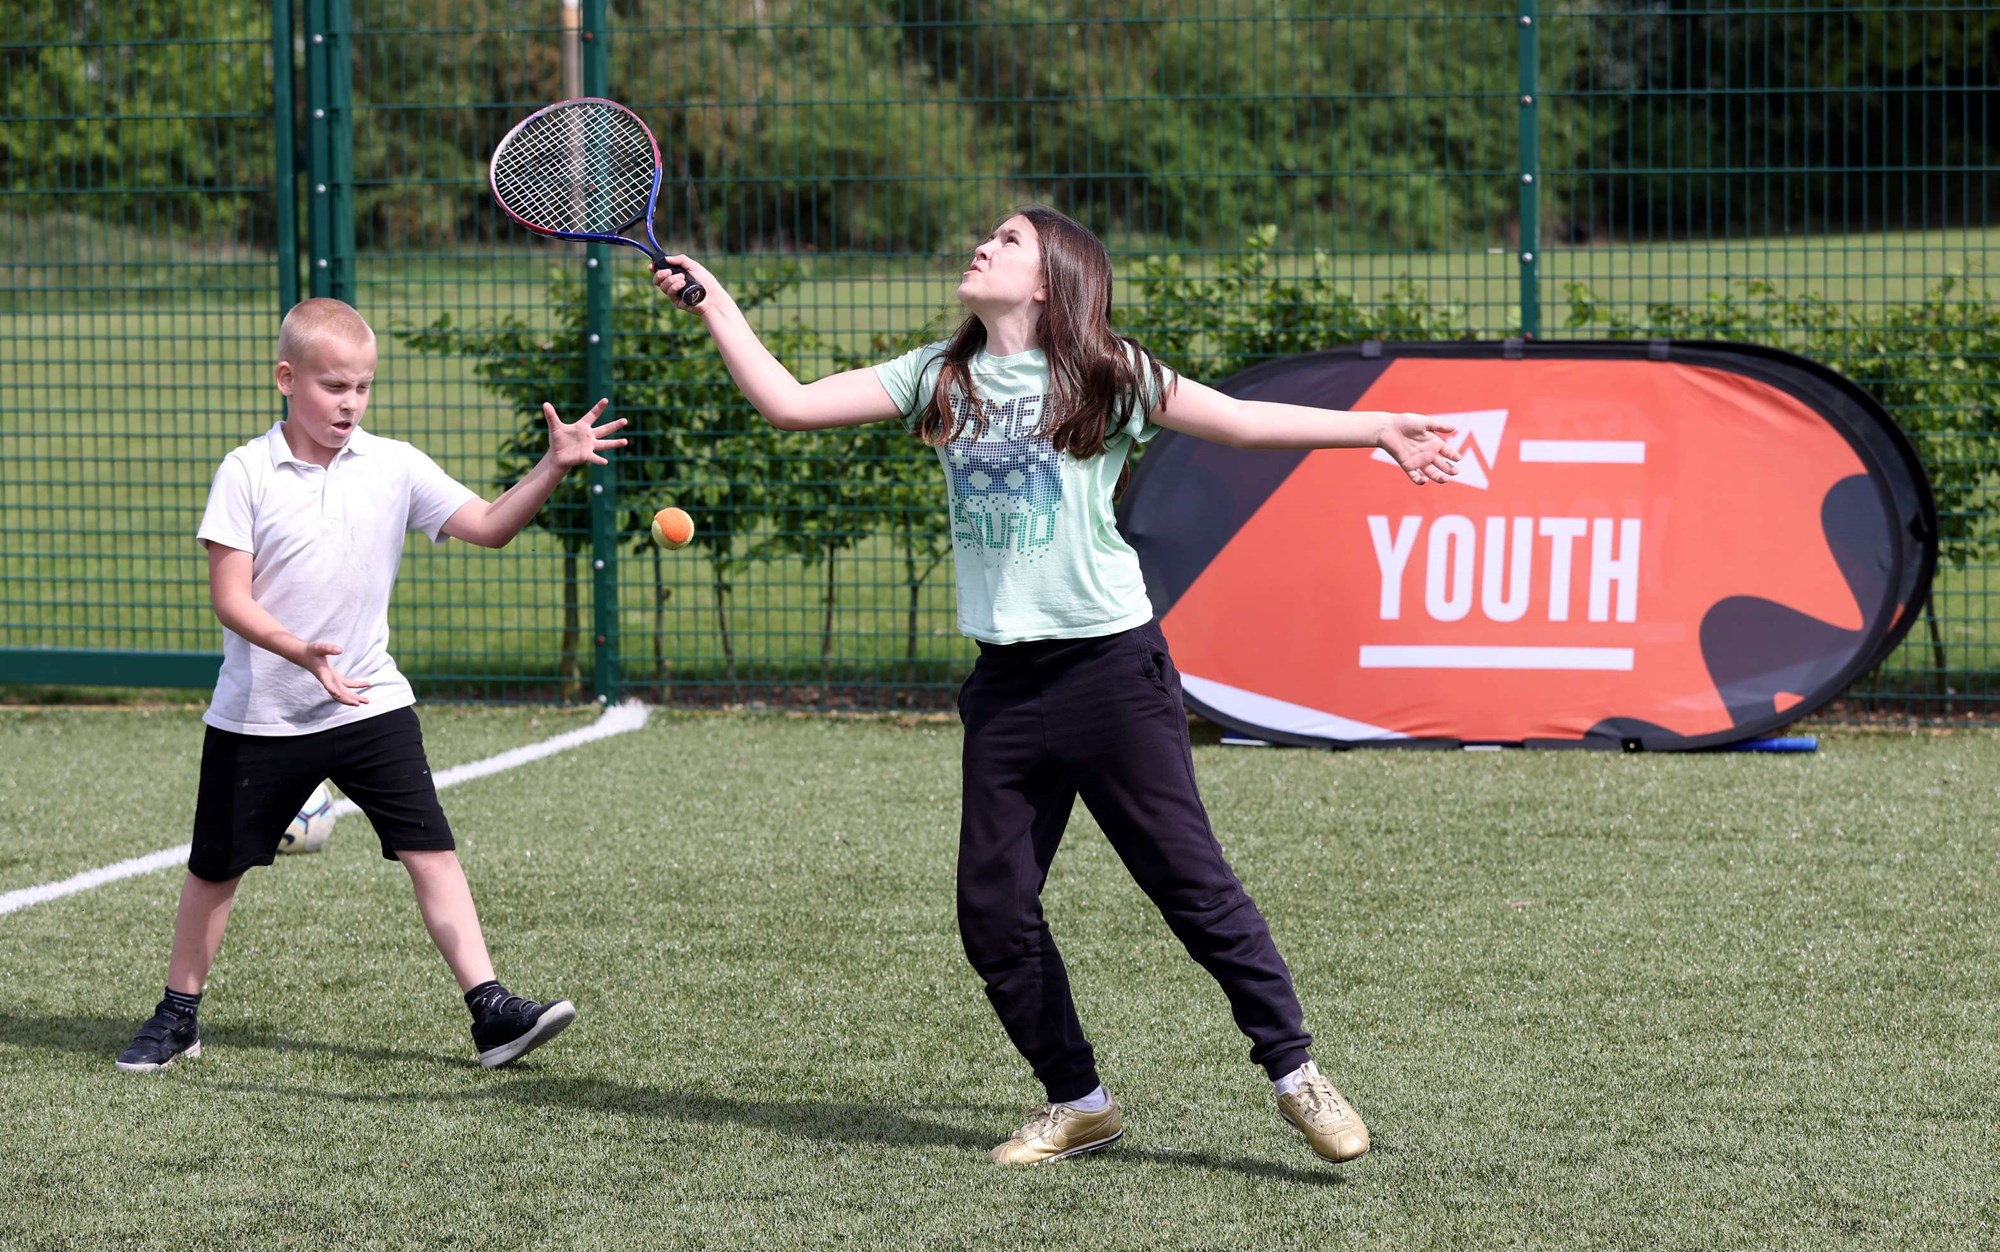 Pupils getting involved during the LTA Youth Session held during Emma Raducanu's US Open Trophy Tour held at Gretton Primary School